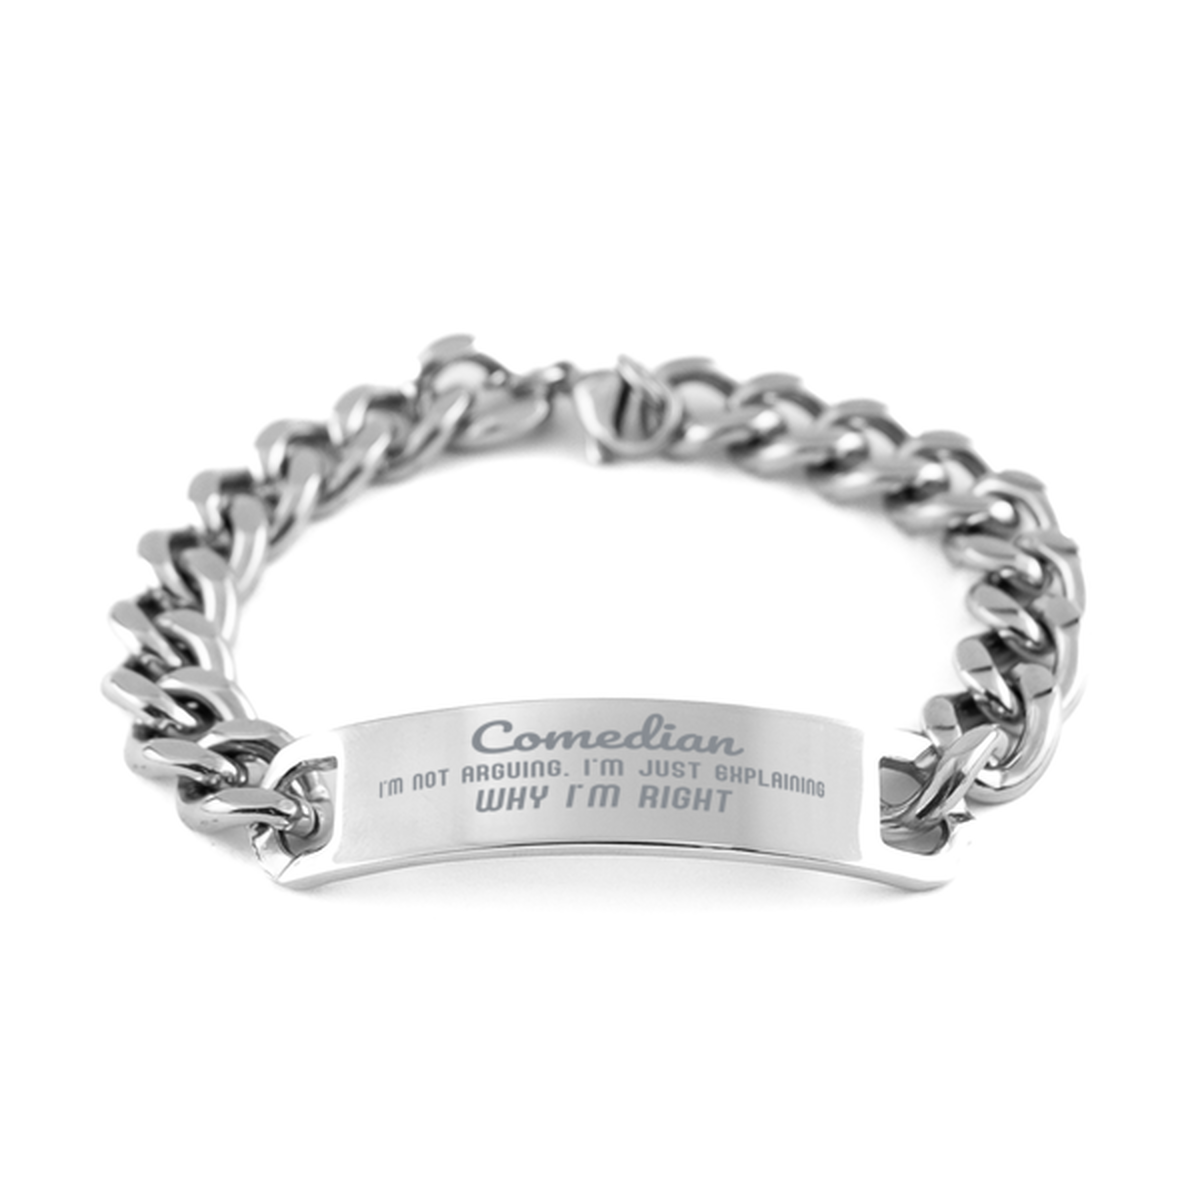 Comedian I'm not Arguing. I'm Just Explaining Why I'm RIGHT Cuban Chain Stainless Steel Bracelet, Graduation Birthday Christmas Comedian Gifts For Comedian Funny Saying Quote Present for Men Women Coworker